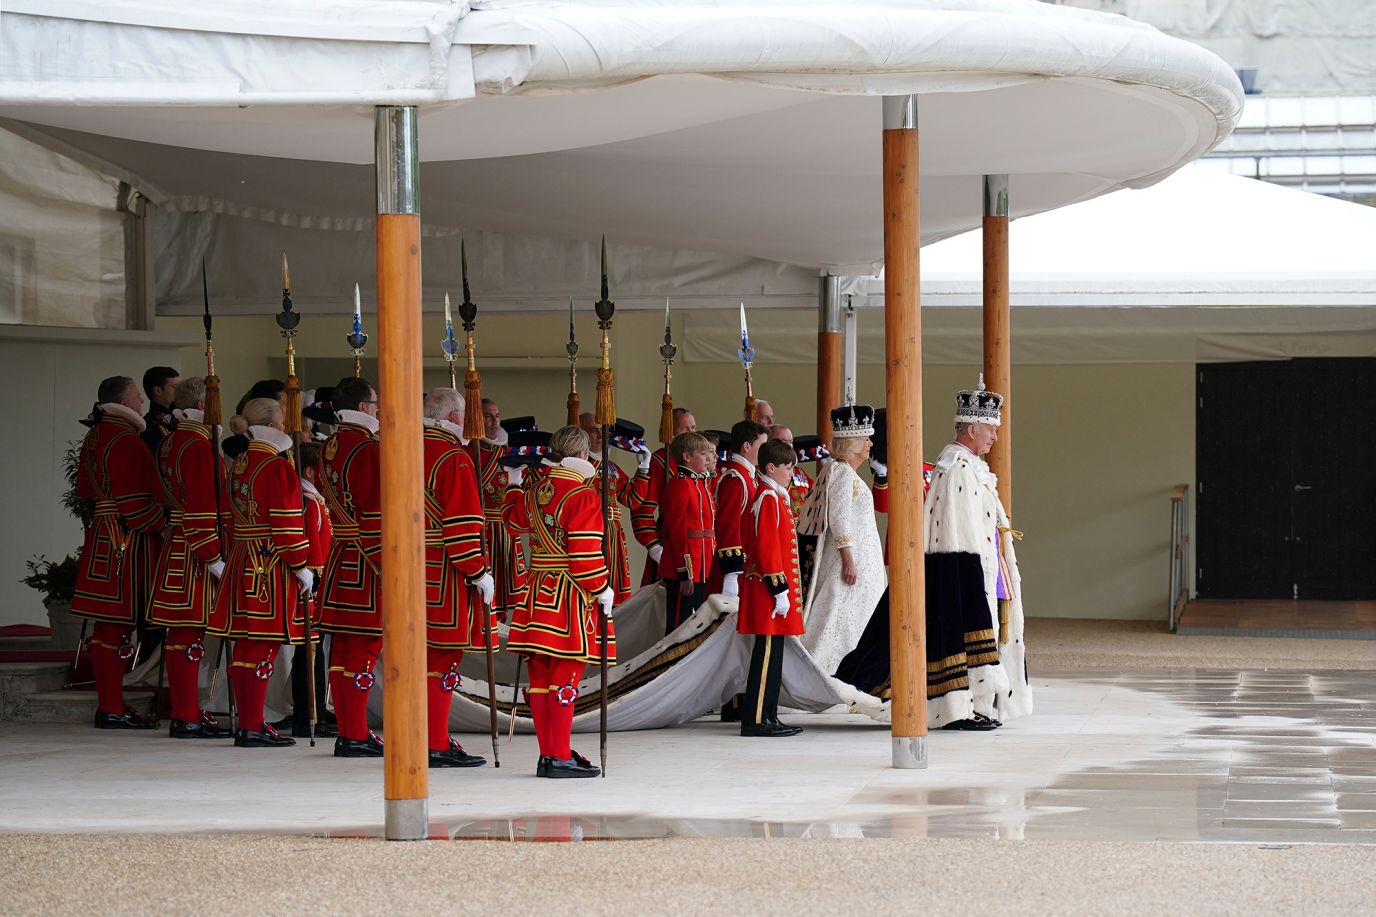 The King and Queen arrive at the palace to receive a <a href="https://www.cnn.com/uk/live-news/king-charles-iii-coronation-ckc-intl-gbr/h_72296ae1e68f2f1709fe7c38b007aeb4" target="_blank">royal salute</a> from members of the military.